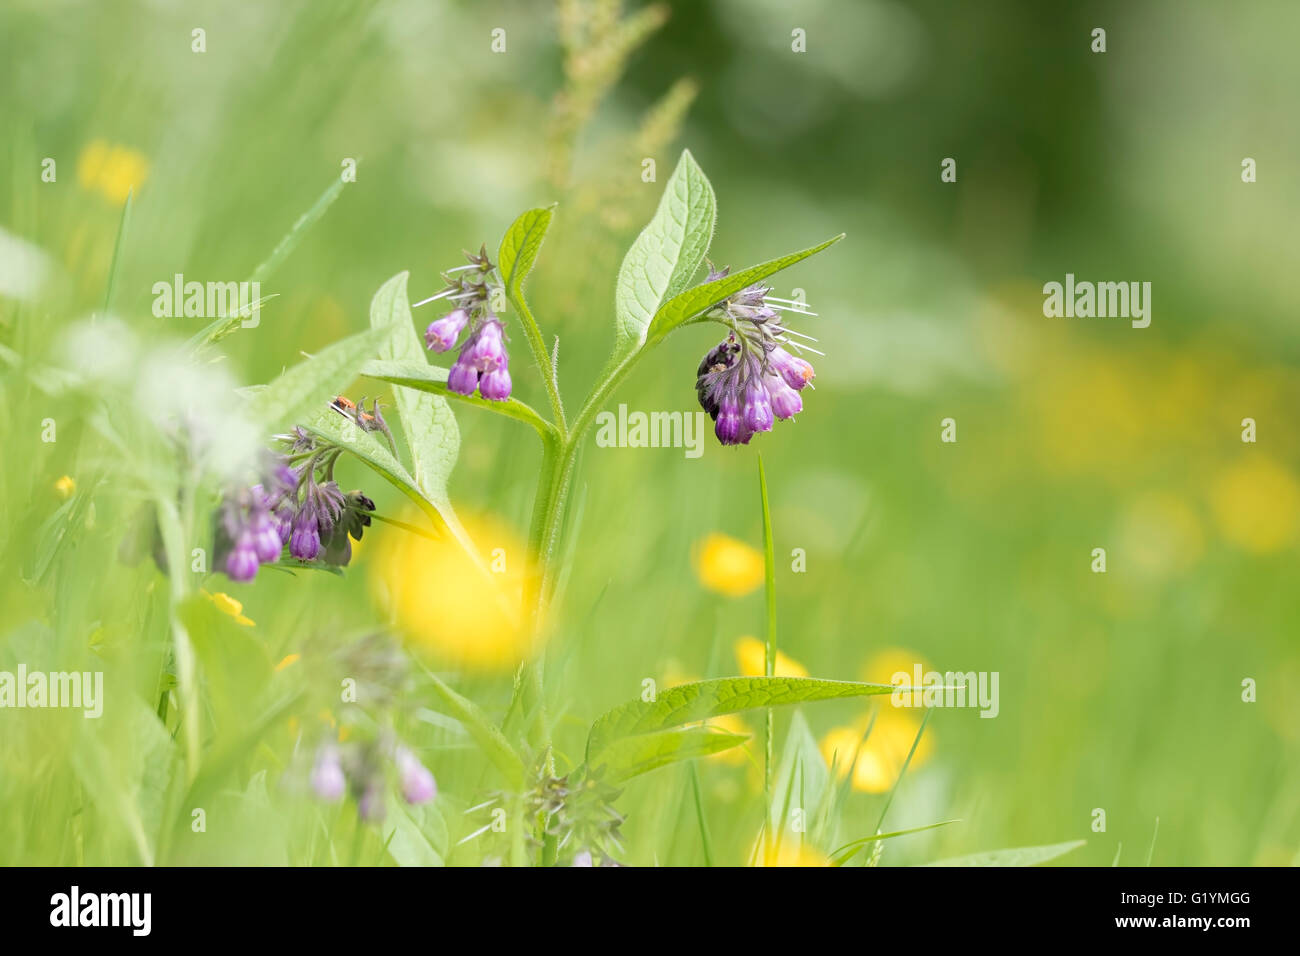 Close-up of purple flowers on a plant called common comfrey or comphrey, Symphytum officinale, blooming in a green meadow. Stock Photo